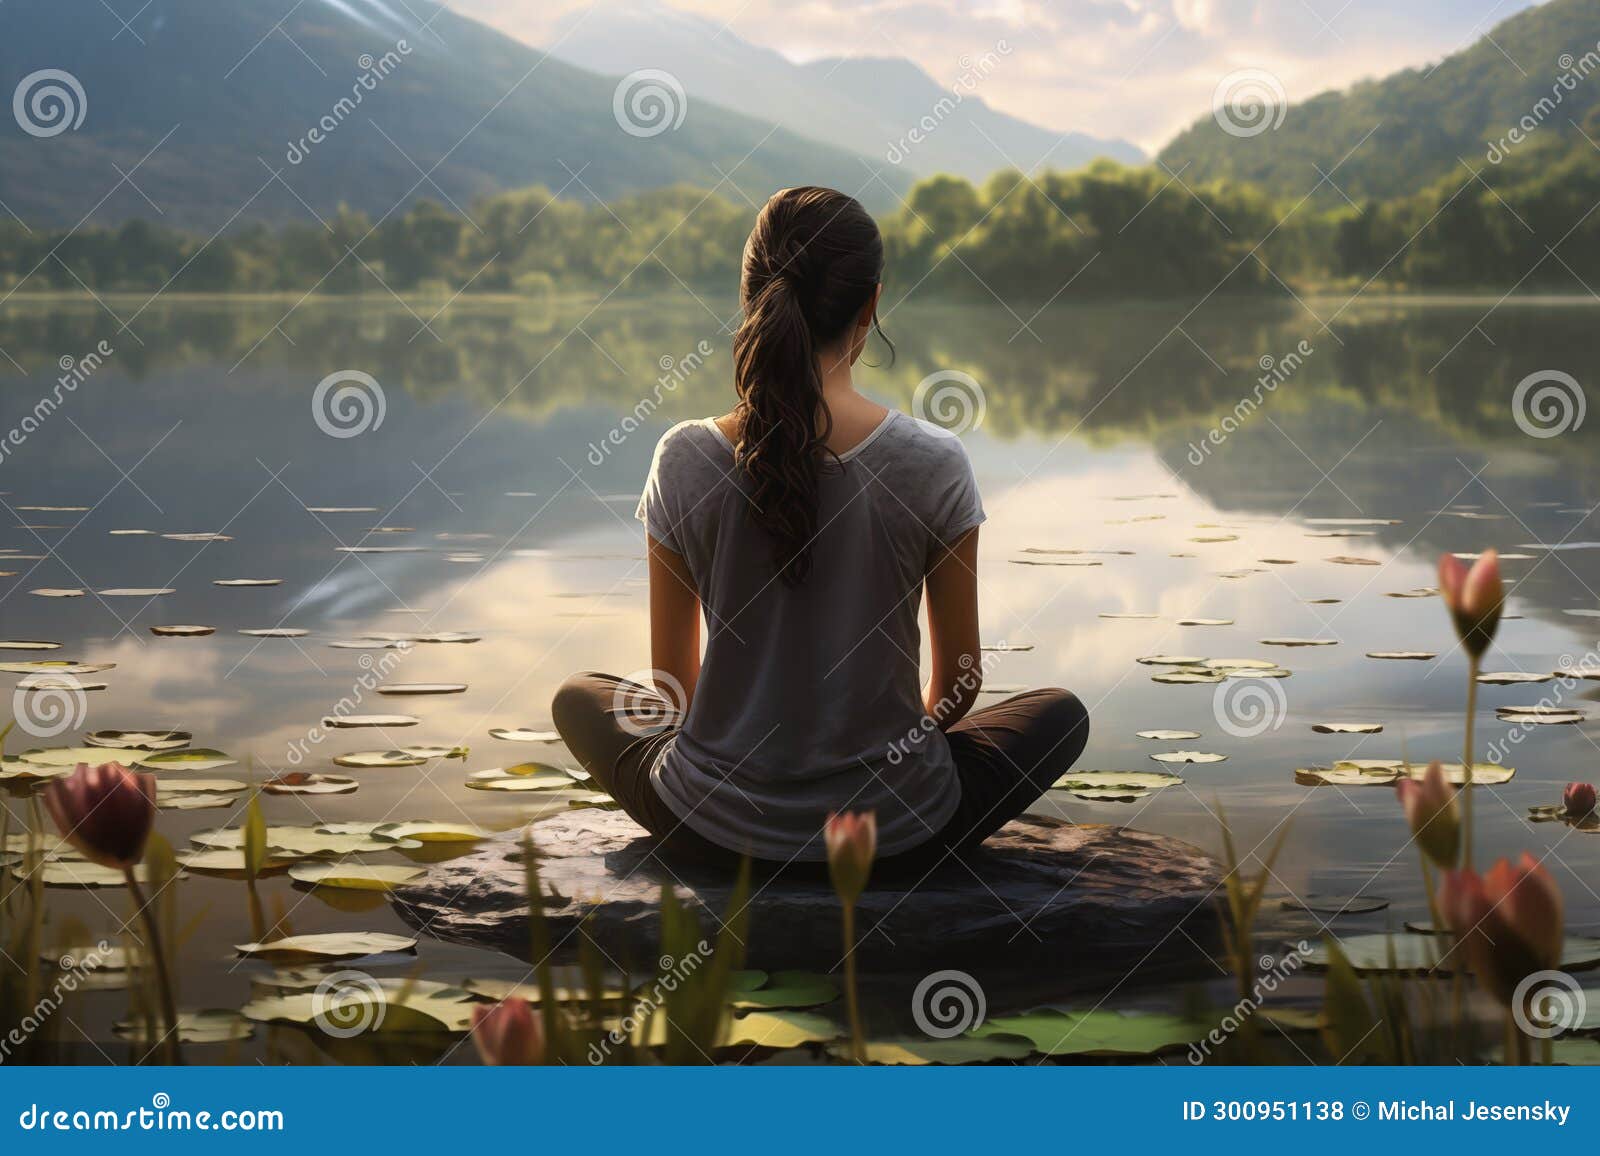 Healthy Woman Doing Yoga Exercise In The Beautiful Nature On The